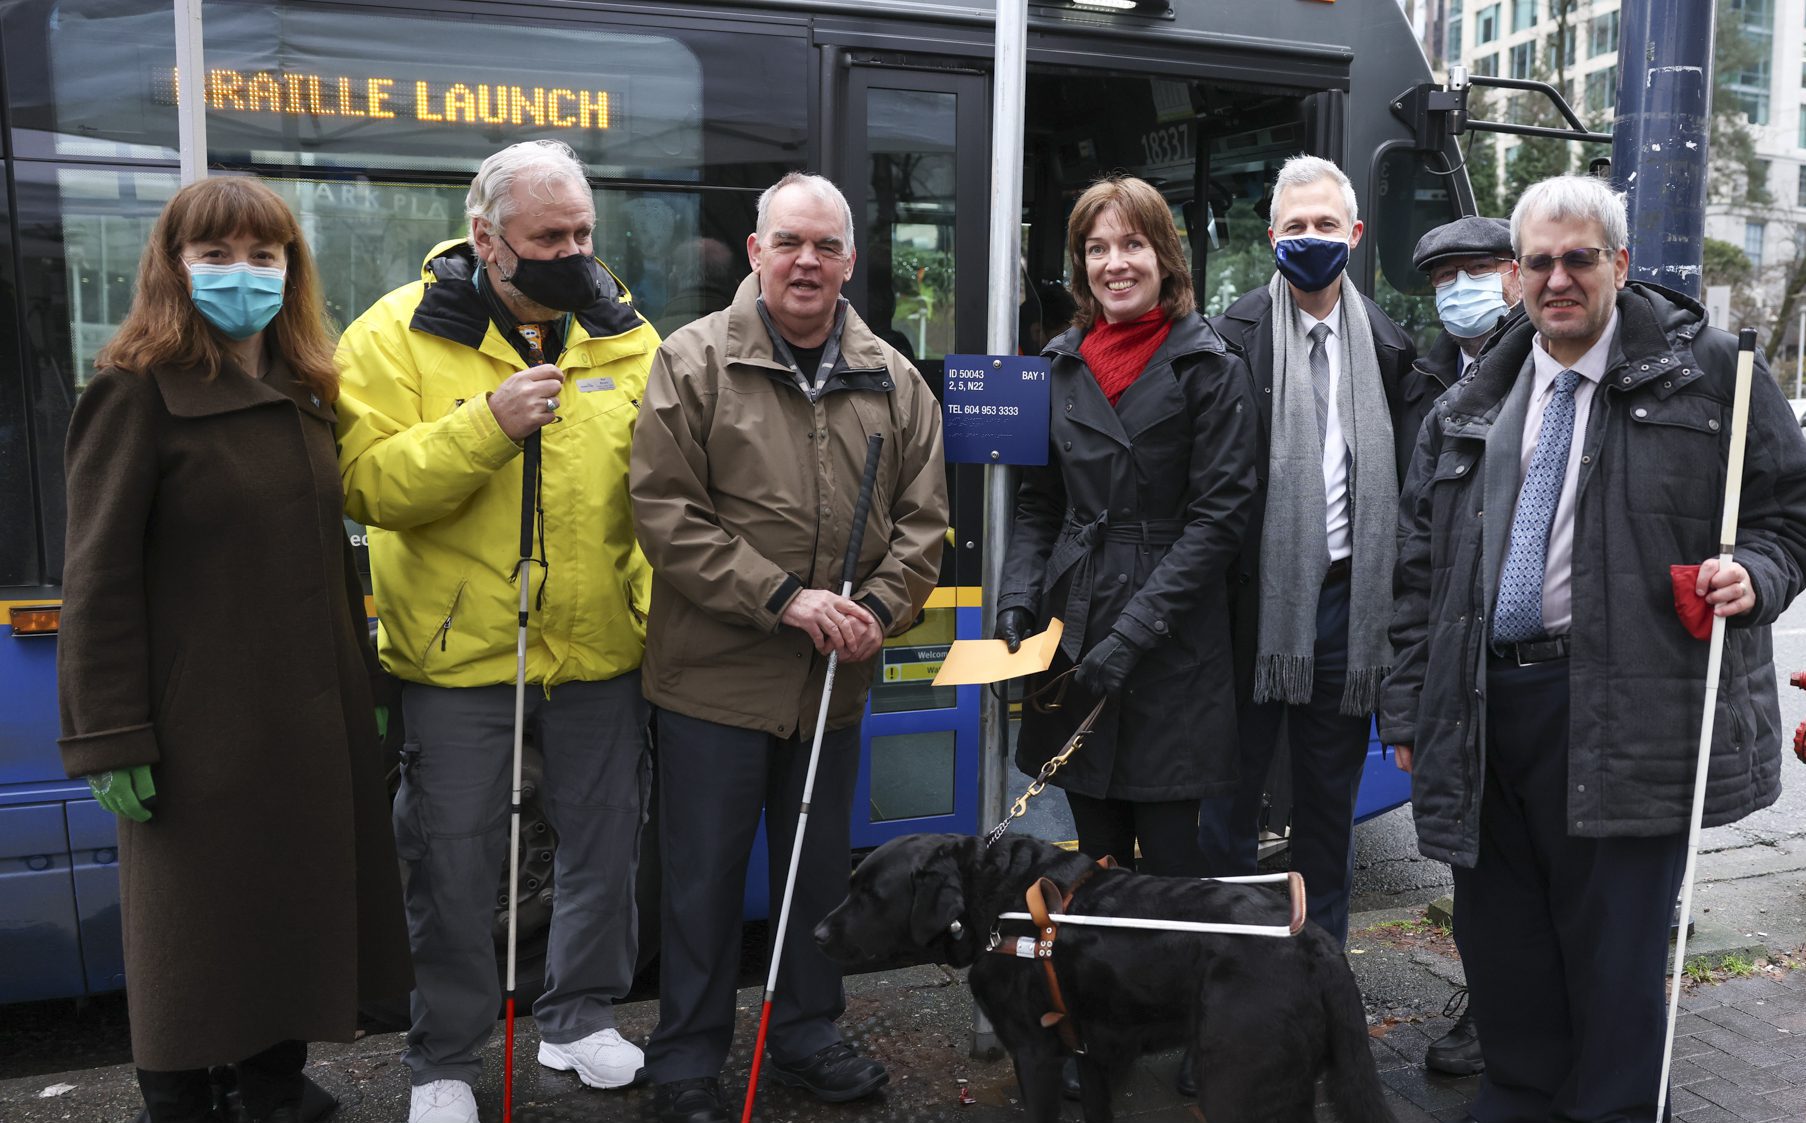 TransLink braille launch event